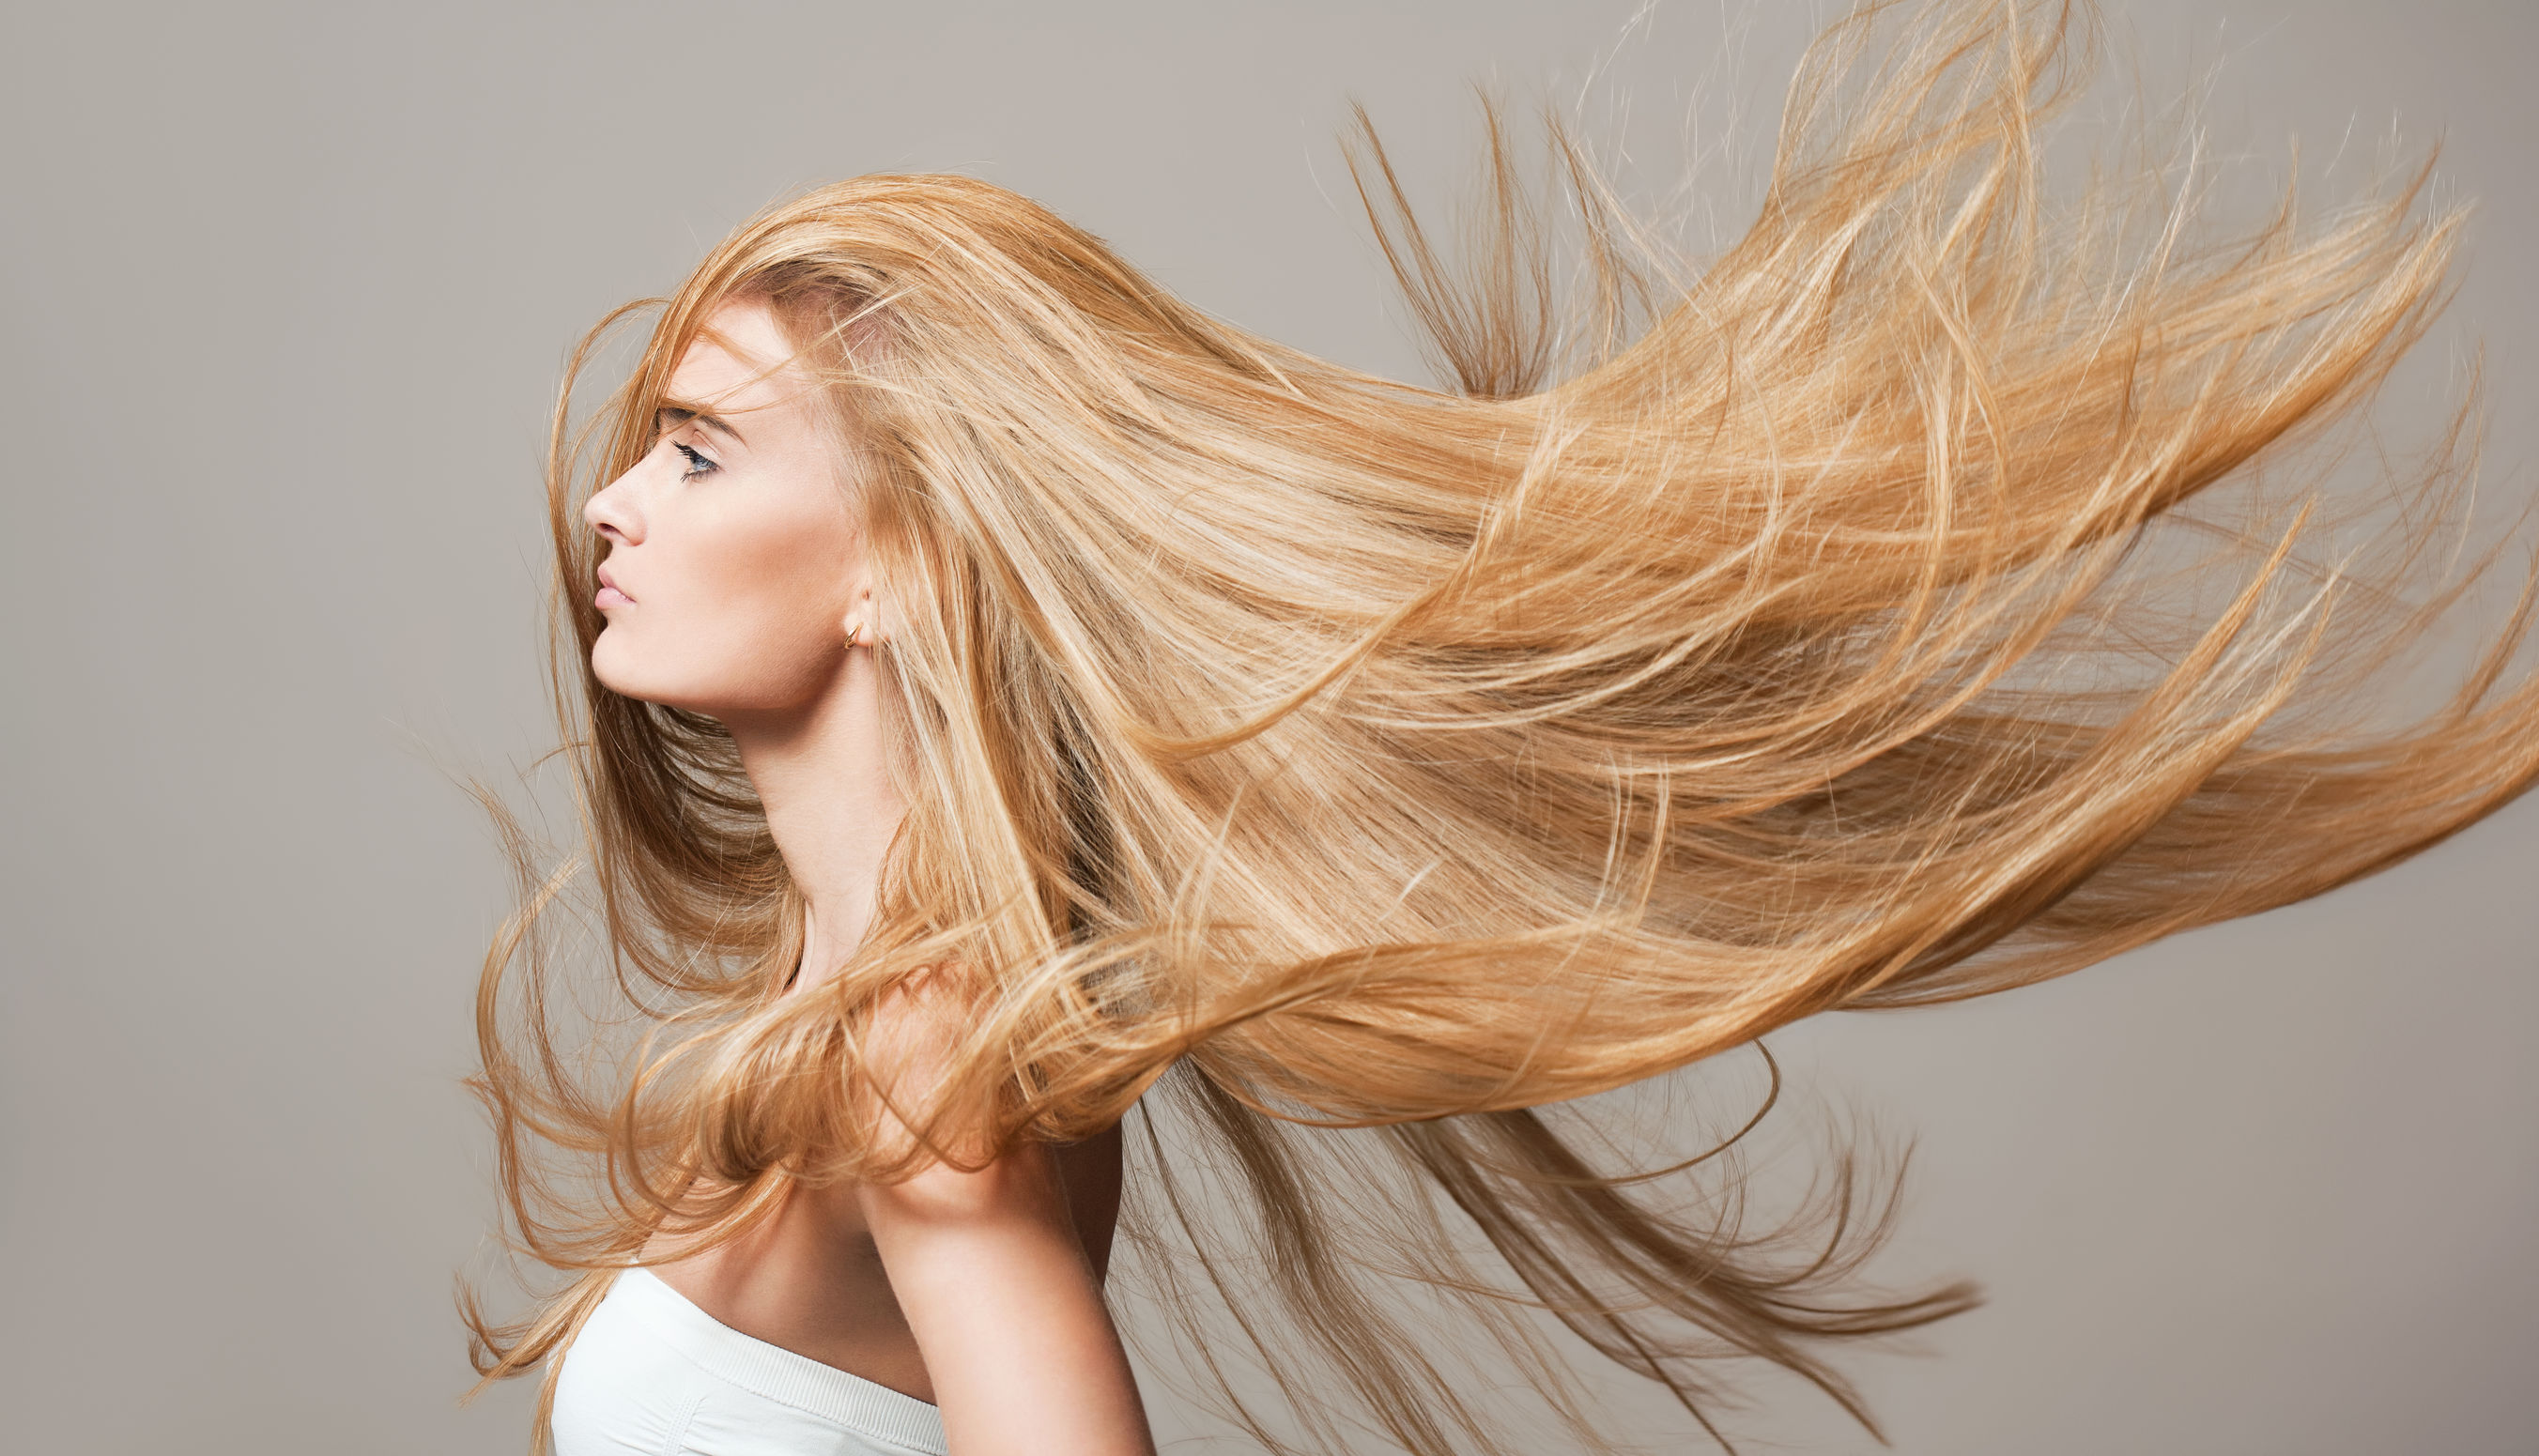 3. The Best Hair Products for Long, Healthy Hair - wide 9